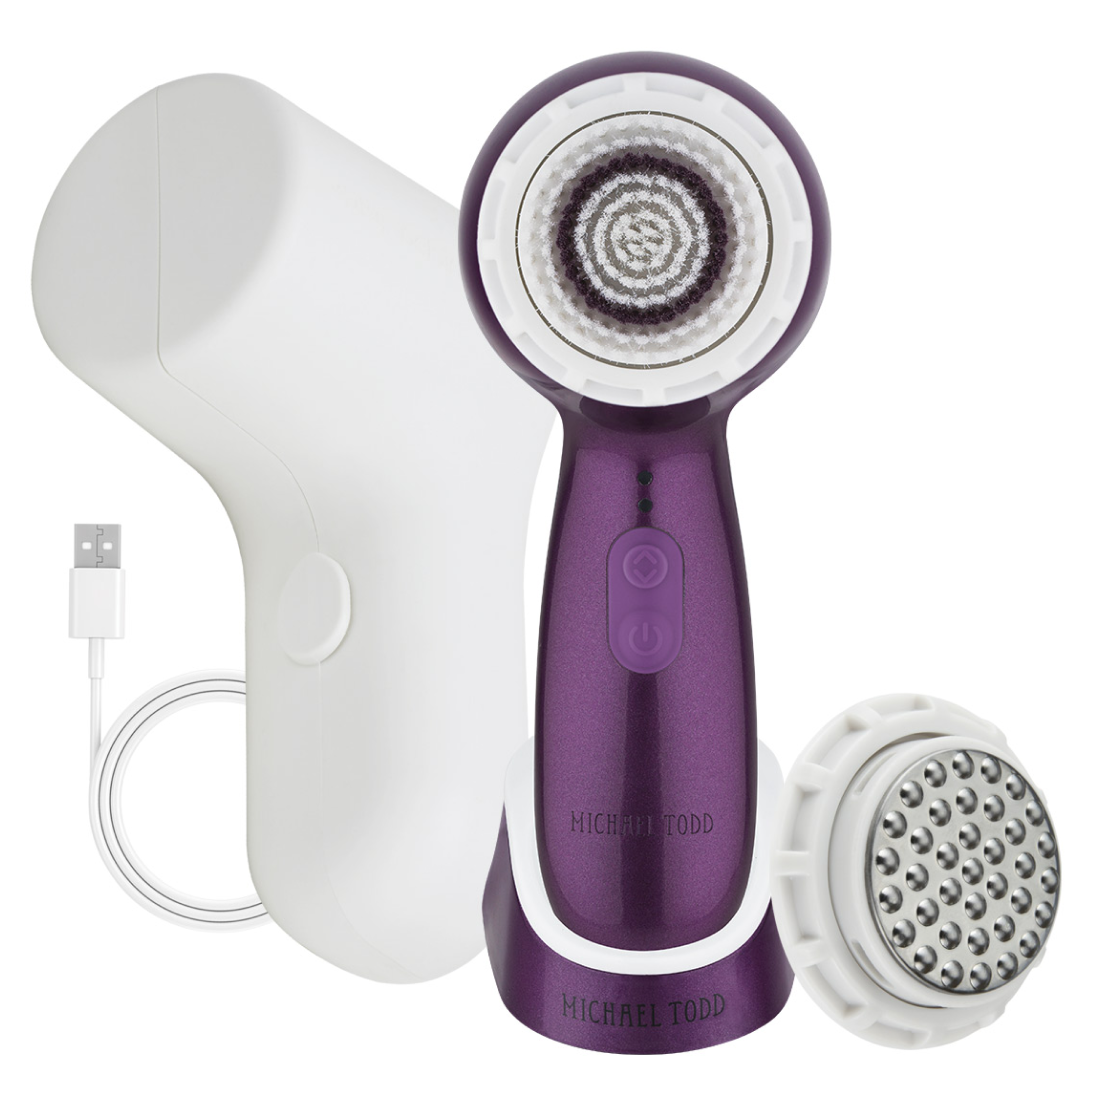 An award-winning 2-Piece Best Sellers Kit electric facial shaver in purple and white, with a USB charger for skincare by Michael Todd Beauty.